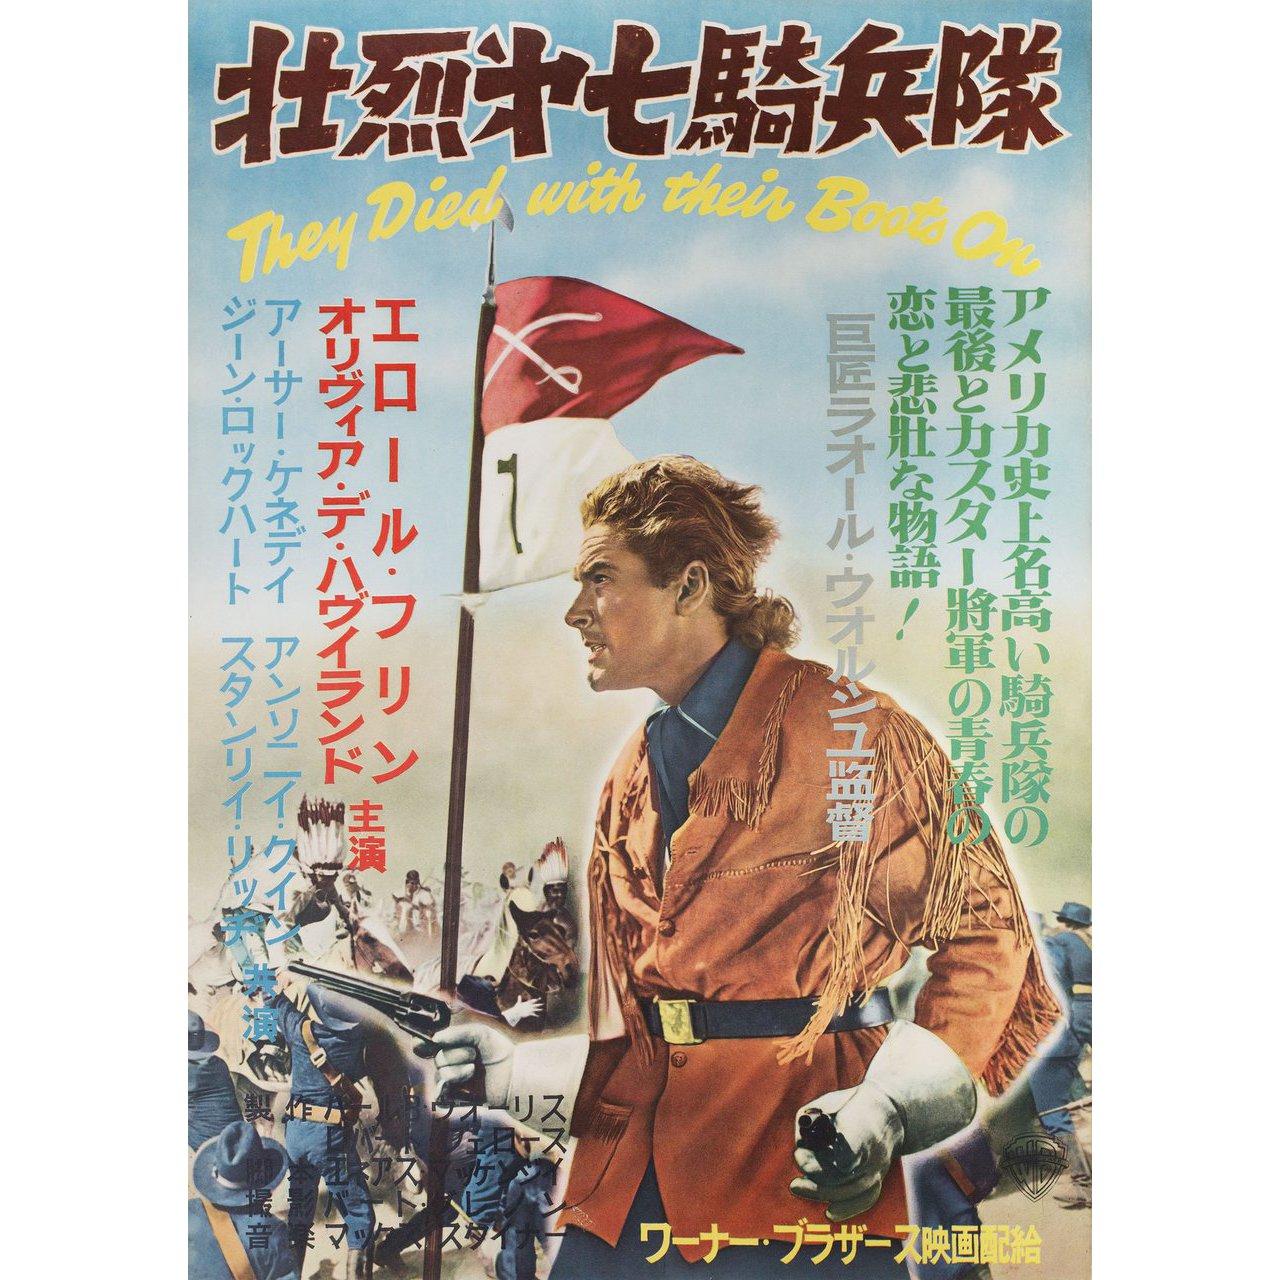 Original 1950s Japanese B2 poster for the first Japanese theatrical release of the 1941 film They Died with Their Boots On directed by Raoul Walsh with Errol Flynn / Olivia de Havilland / Arthur Kennedy / Charley Grapewin. Very good-fine condition,